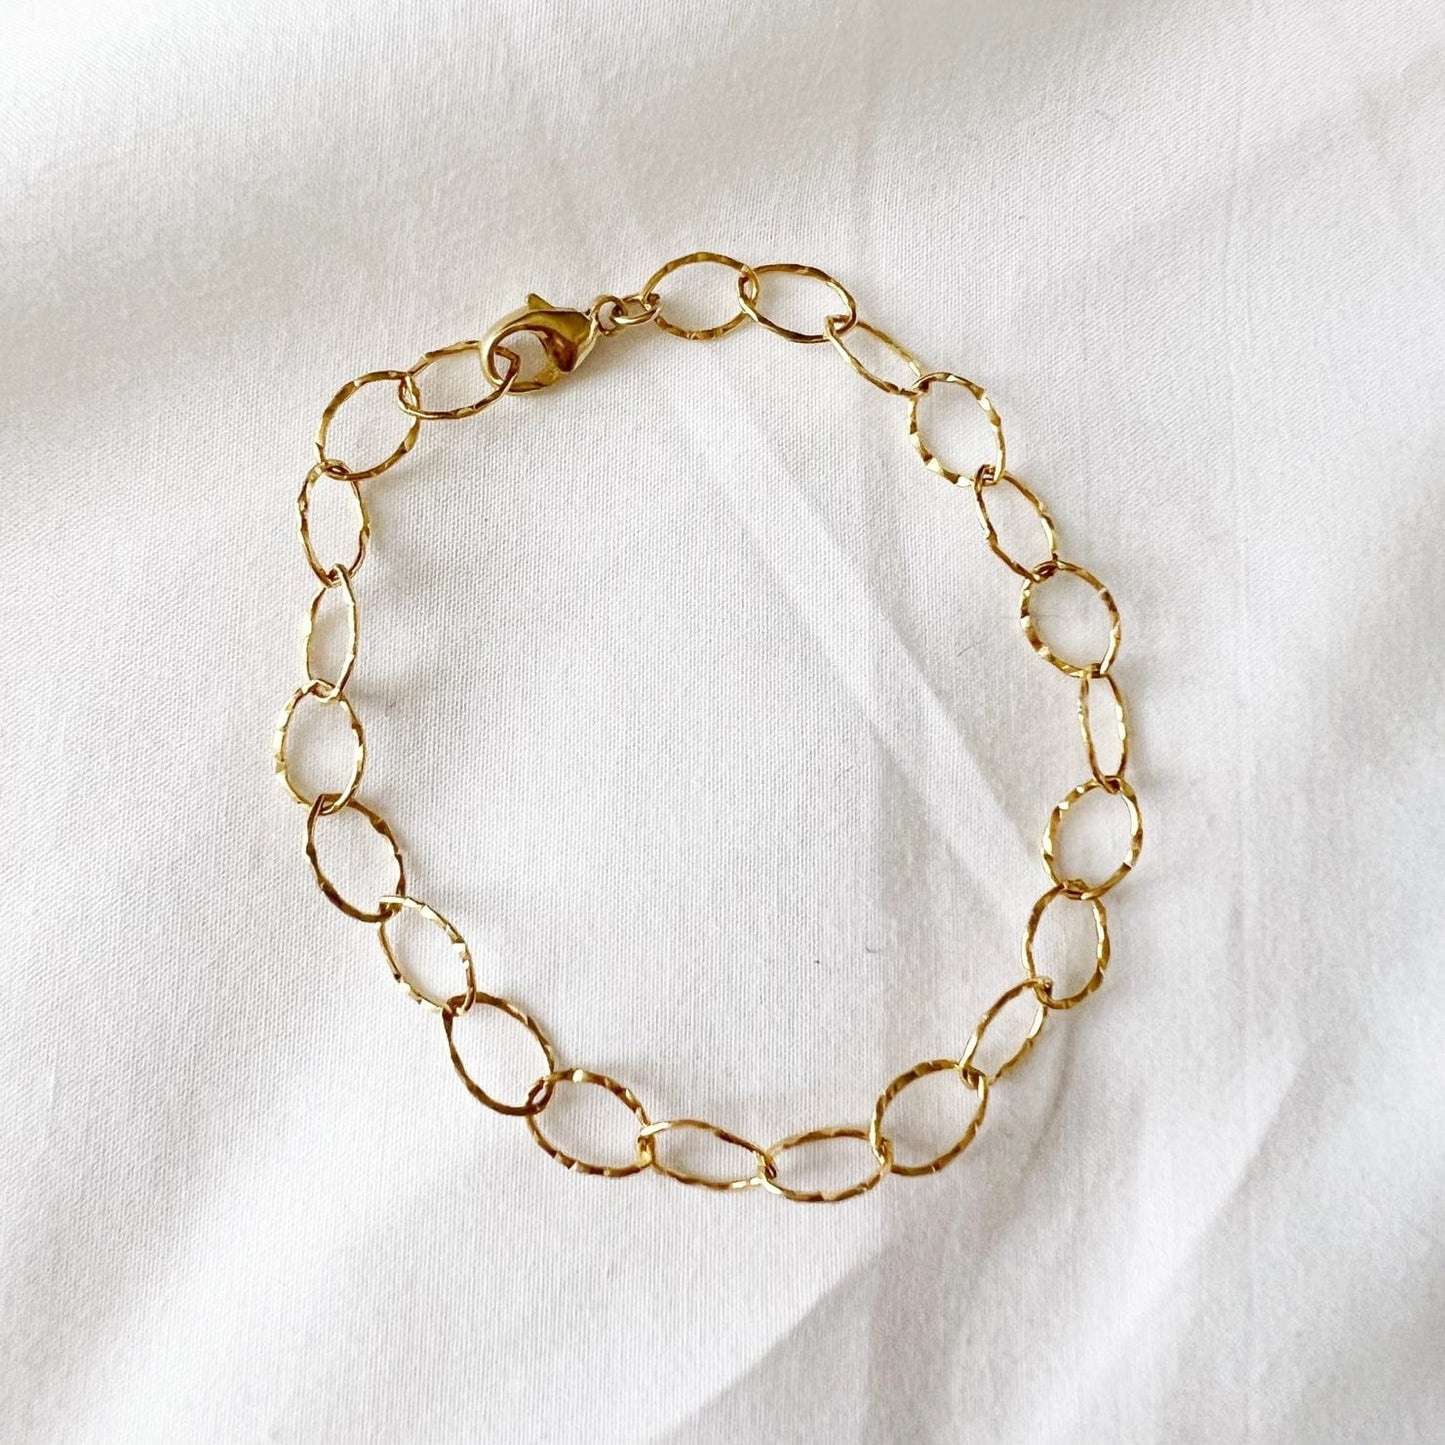 BRC-GF London Hammered Paperclip Chain Bracelet Gold Fill